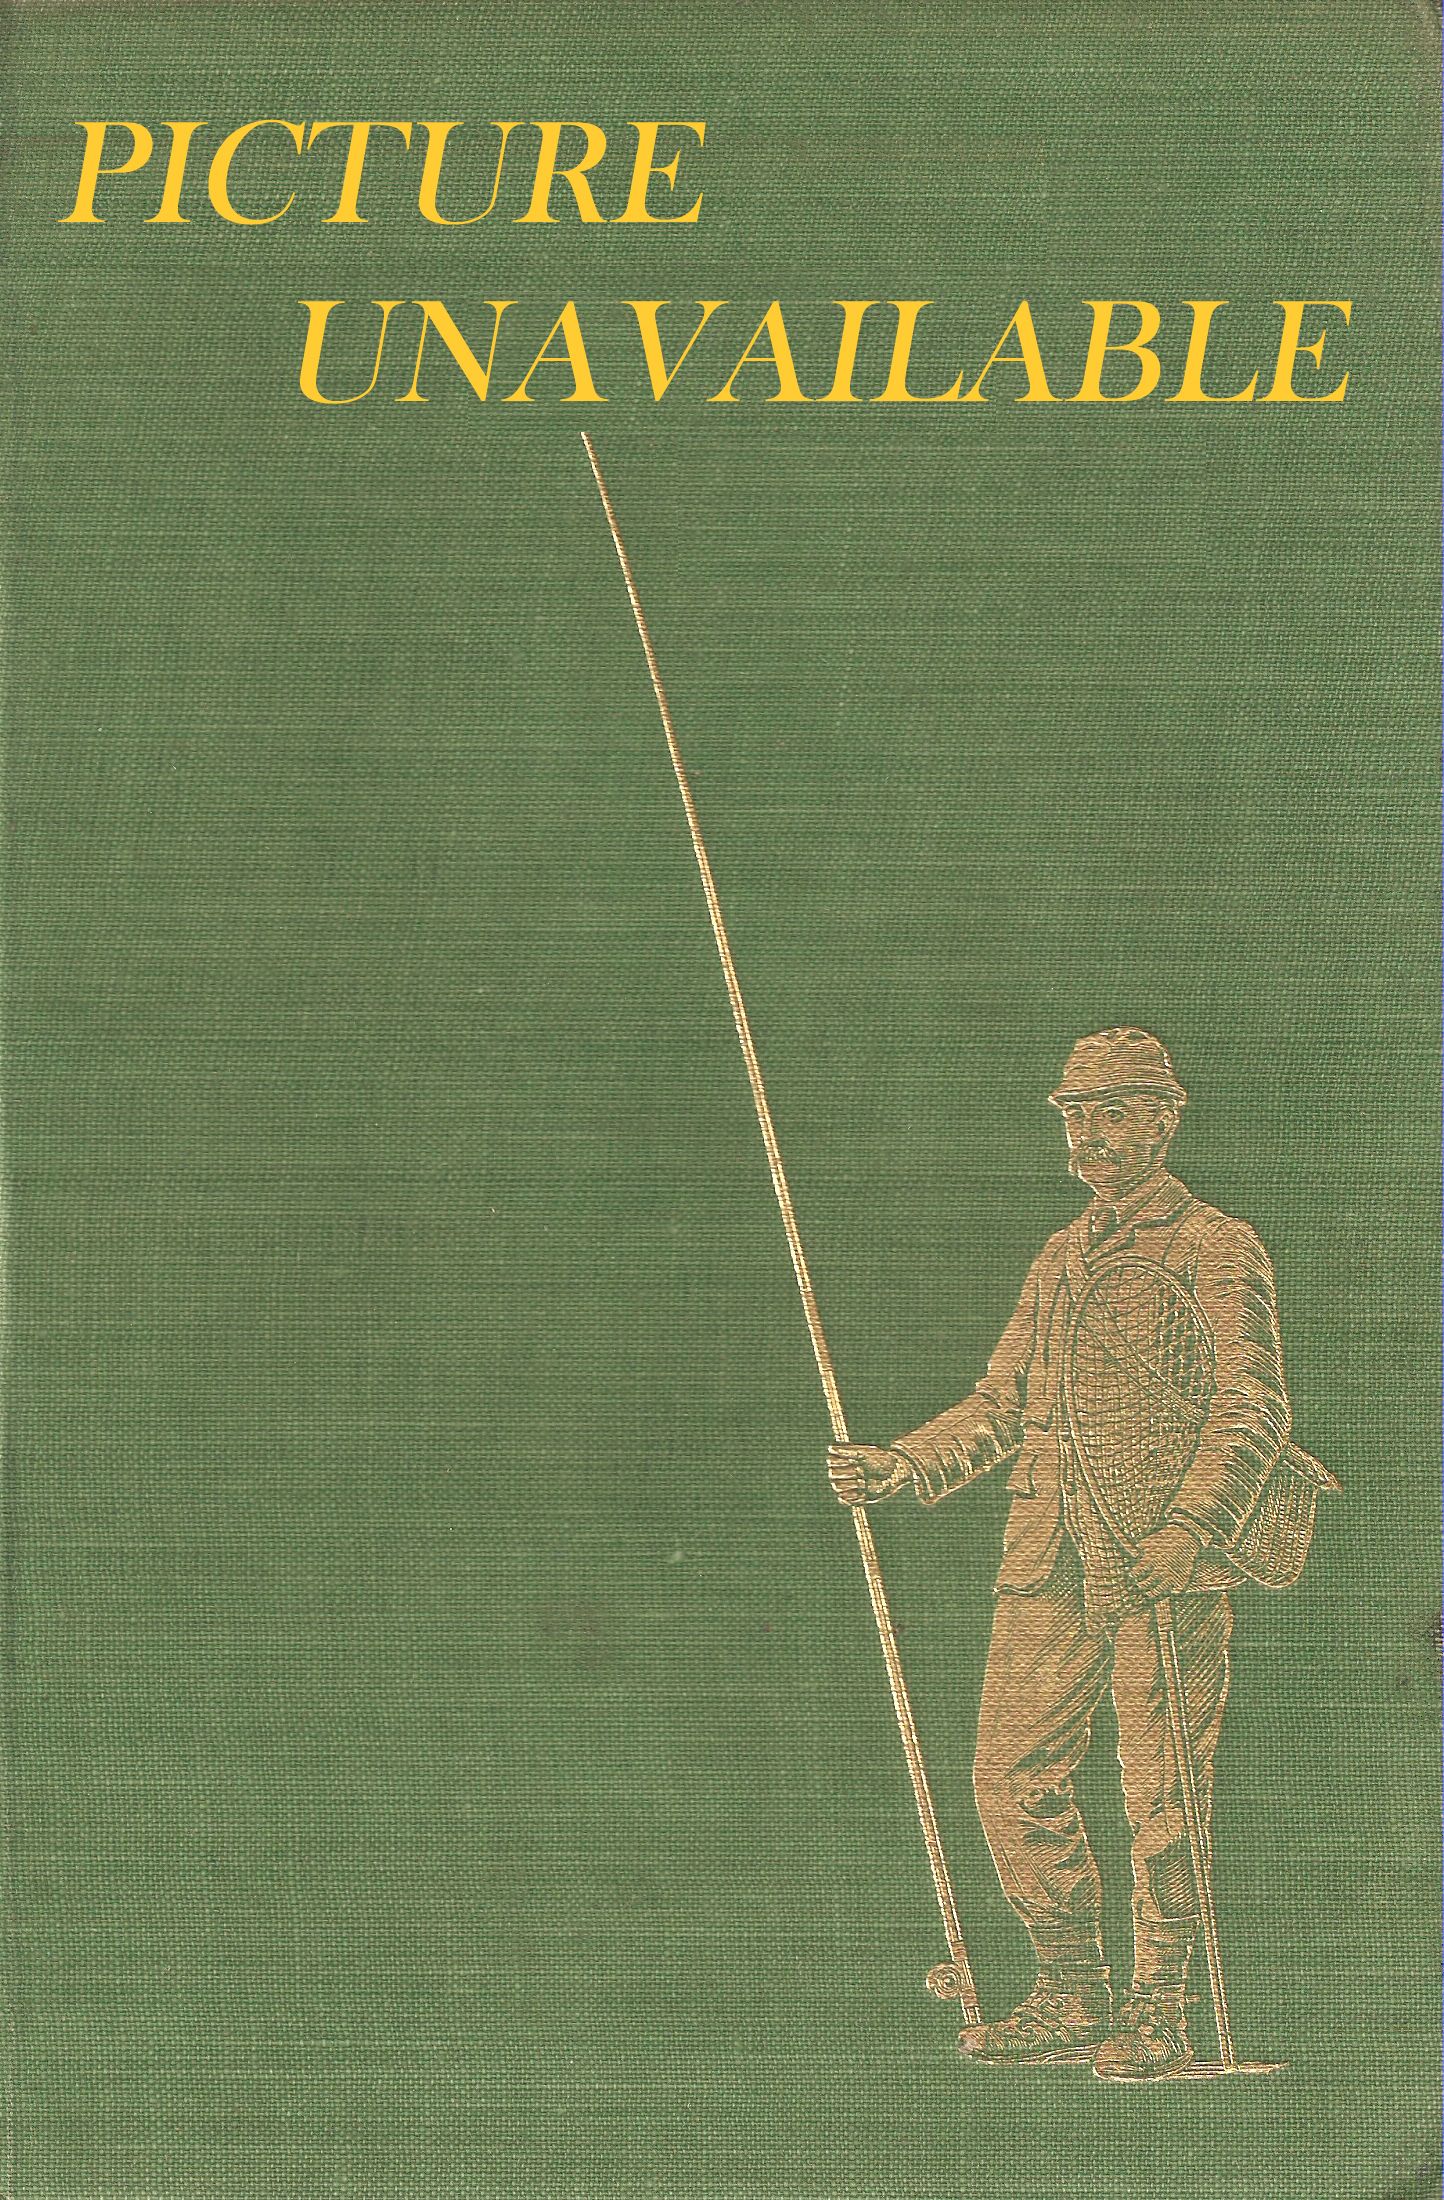 THE CONSTANT FISHERMAN. By Major H.E. Morritt. With an introduction by  Arthur Ransome. Illustrated by Raymond Sheppard.